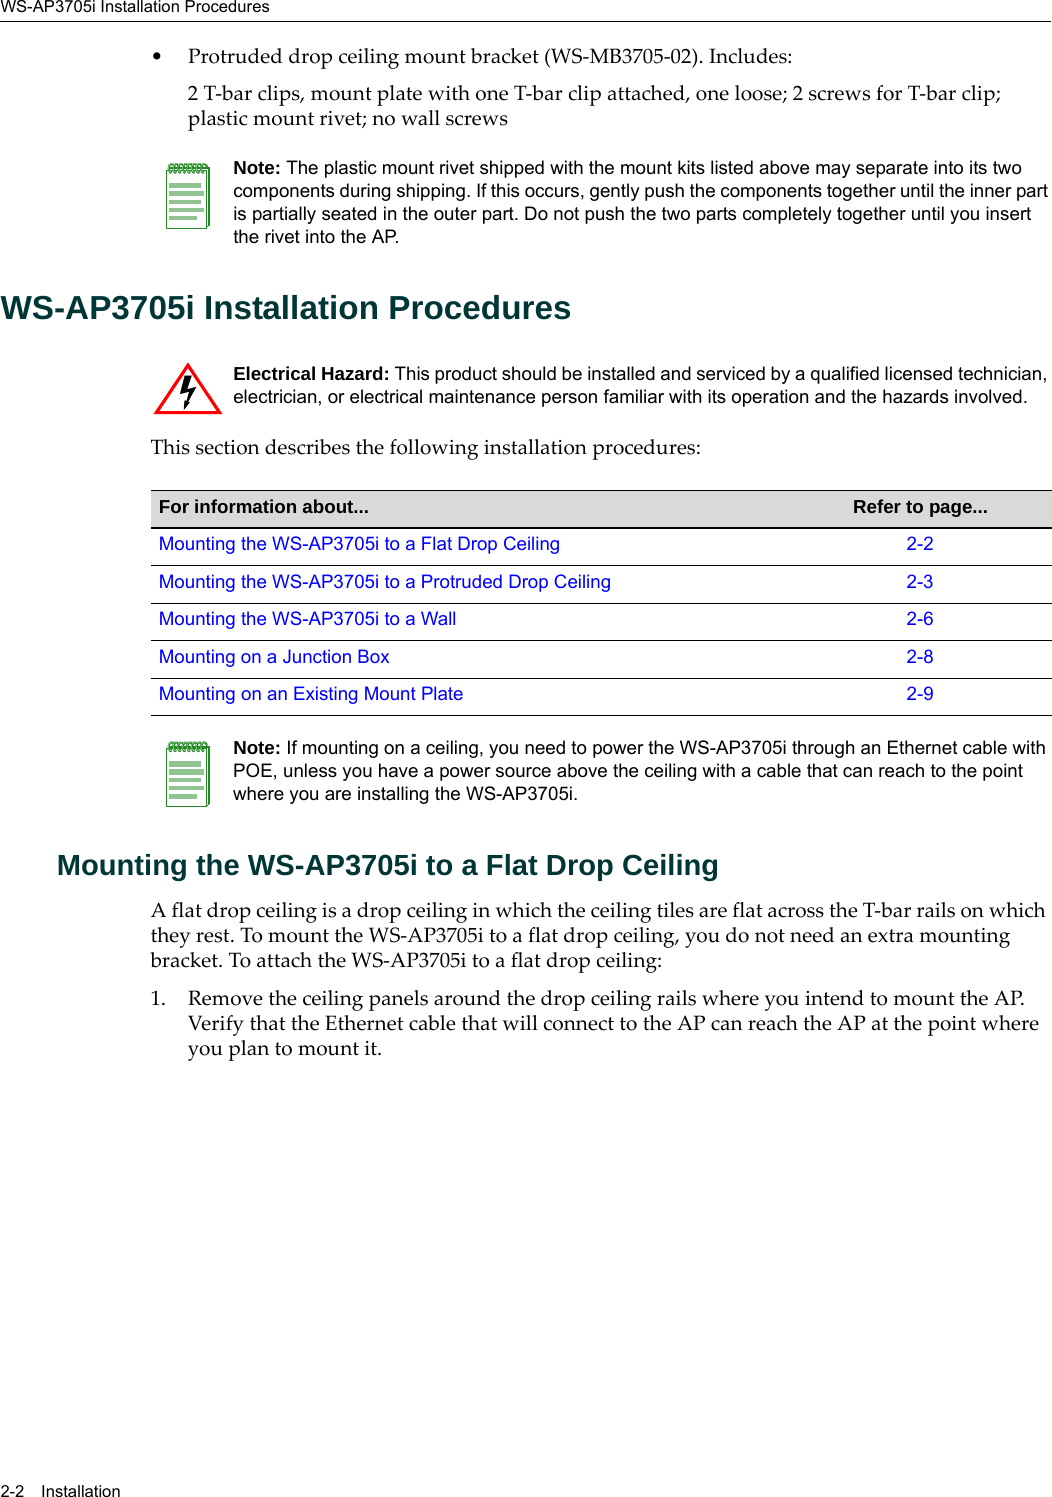 WS-AP3705i Installation Procedures2-2 Installation• Protruded drop ceiling mount bracket (WS-MB3705-02). Includes:2 T-bar clips, mount plate with one T-bar clip attached, one loose; 2 screws for T-bar clip; plastic mount rivet; no wall screwsWS-AP3705i Installation ProceduresThis section describes the following installation procedures:Mounting the WS-AP3705i to a Flat Drop CeilingA flat drop ceiling is a drop ceiling in which the ceiling tiles are flat across the T-bar rails on which they rest. To mount the WS-AP3705i to a flat drop ceiling, you do not need an extra mounting bracket. To attach the WS-AP3705i to a flat drop ceiling:1. Remove the ceiling panels around the drop ceiling rails where you intend to mount the AP. Verify that the Ethernet cable that will connect to the AP can reach the AP at the point where you plan to mount it.Note: The plastic mount rivet shipped with the mount kits listed above may separate into its two components during shipping. If this occurs, gently push the components together until the inner part is partially seated in the outer part. Do not push the two parts completely together until you insert the rivet into the AP.Electrical Hazard: This product should be installed and serviced by a qualified licensed technician, electrician, or electrical maintenance person familiar with its operation and the hazards involved. For information about... Refer to page...Mounting the WS-AP3705i to a Flat Drop Ceiling 2-2Mounting the WS-AP3705i to a Protruded Drop Ceiling 2-3Mounting the WS-AP3705i to a Wall 2-6Mounting on a Junction Box 2-8Mounting on an Existing Mount Plate 2-9Note: If mounting on a ceiling, you need to power the WS-AP3705i through an Ethernet cable with POE, unless you have a power source above the ceiling with a cable that can reach to the point where you are installing the WS-AP3705i.